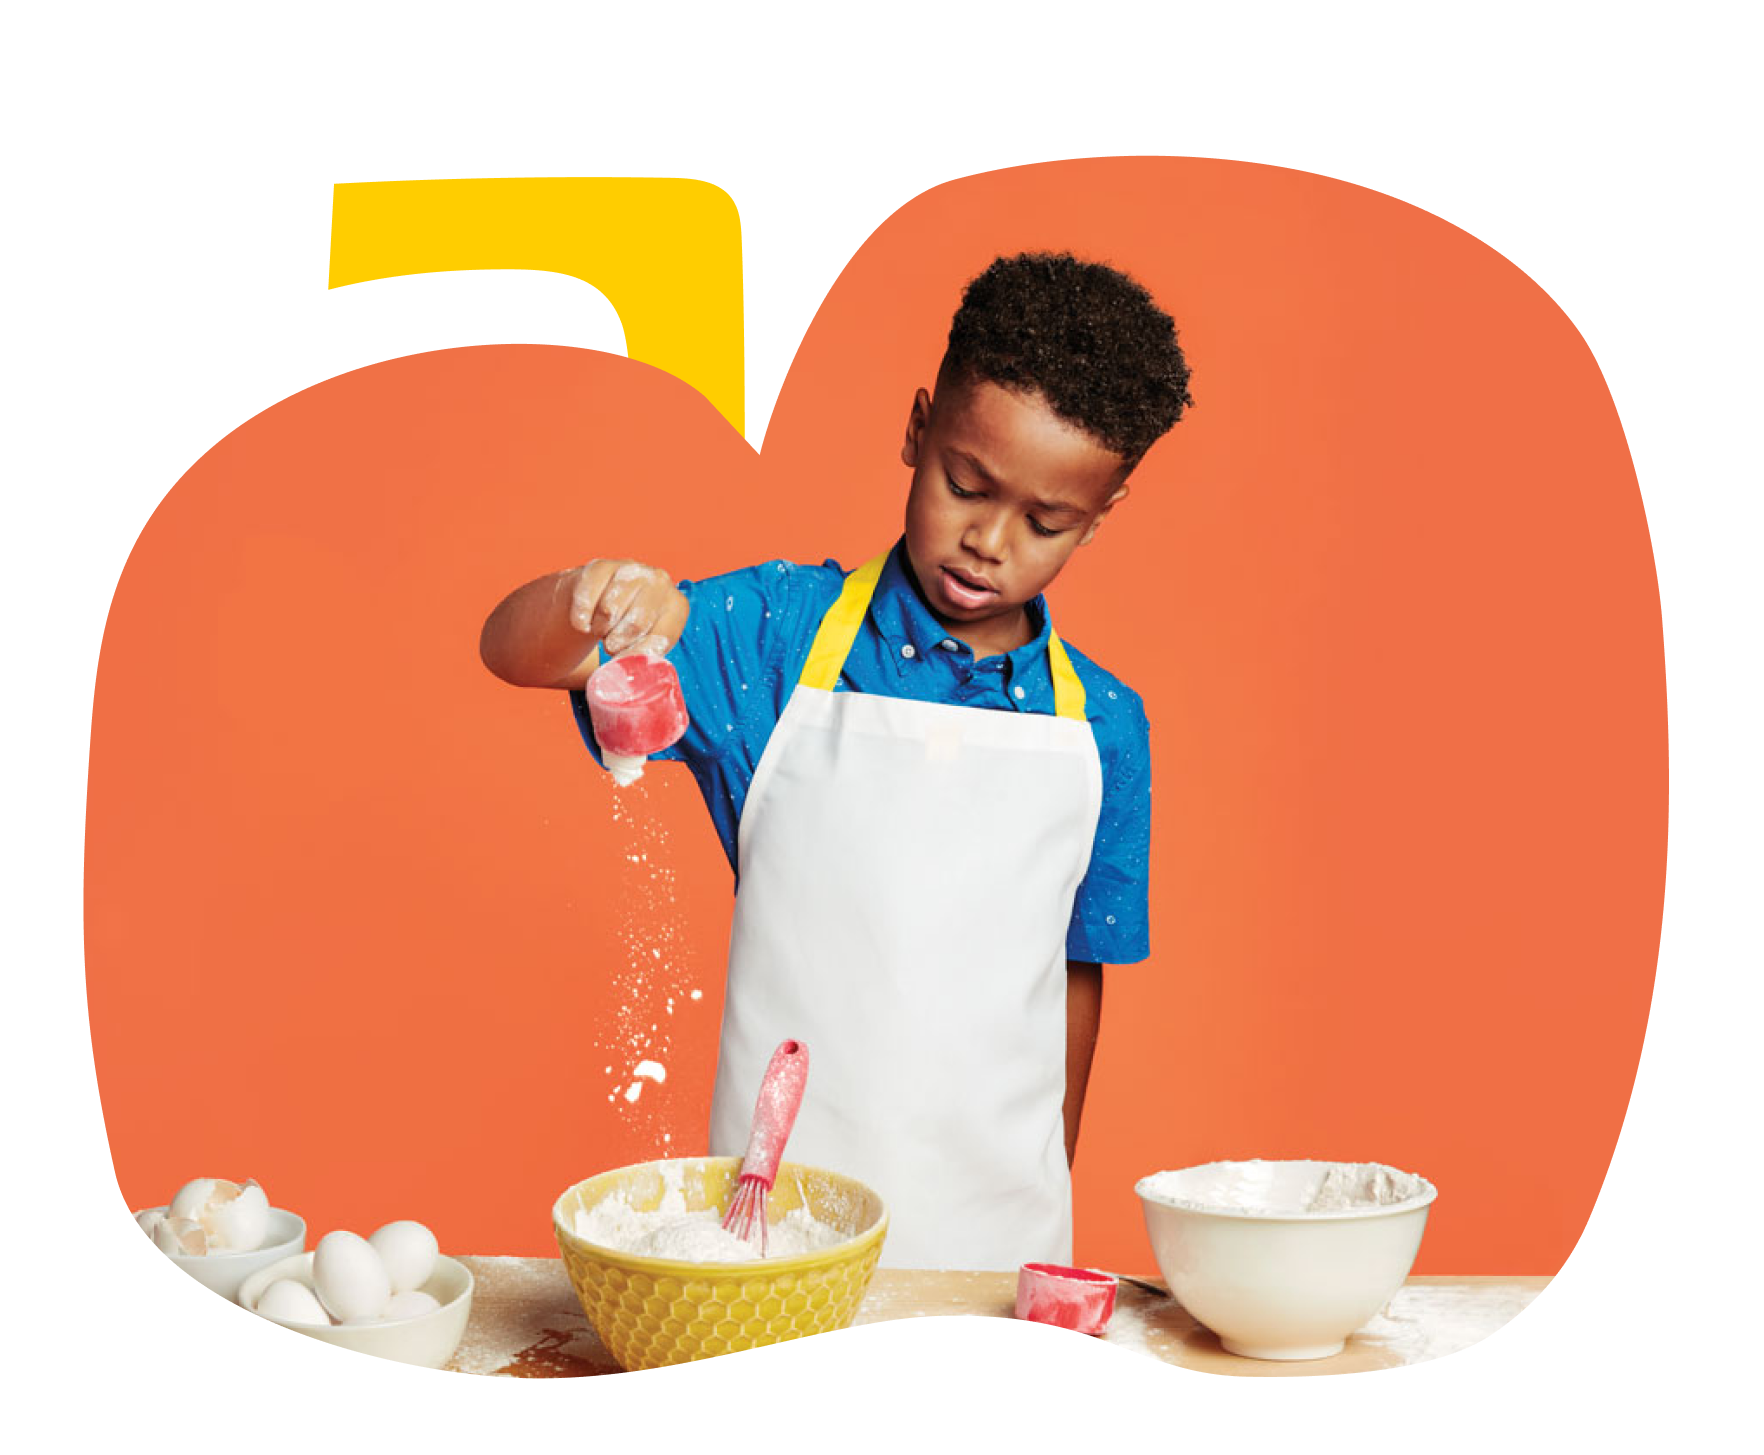 Young boy pouring a cup of flour into a mixing bowl.